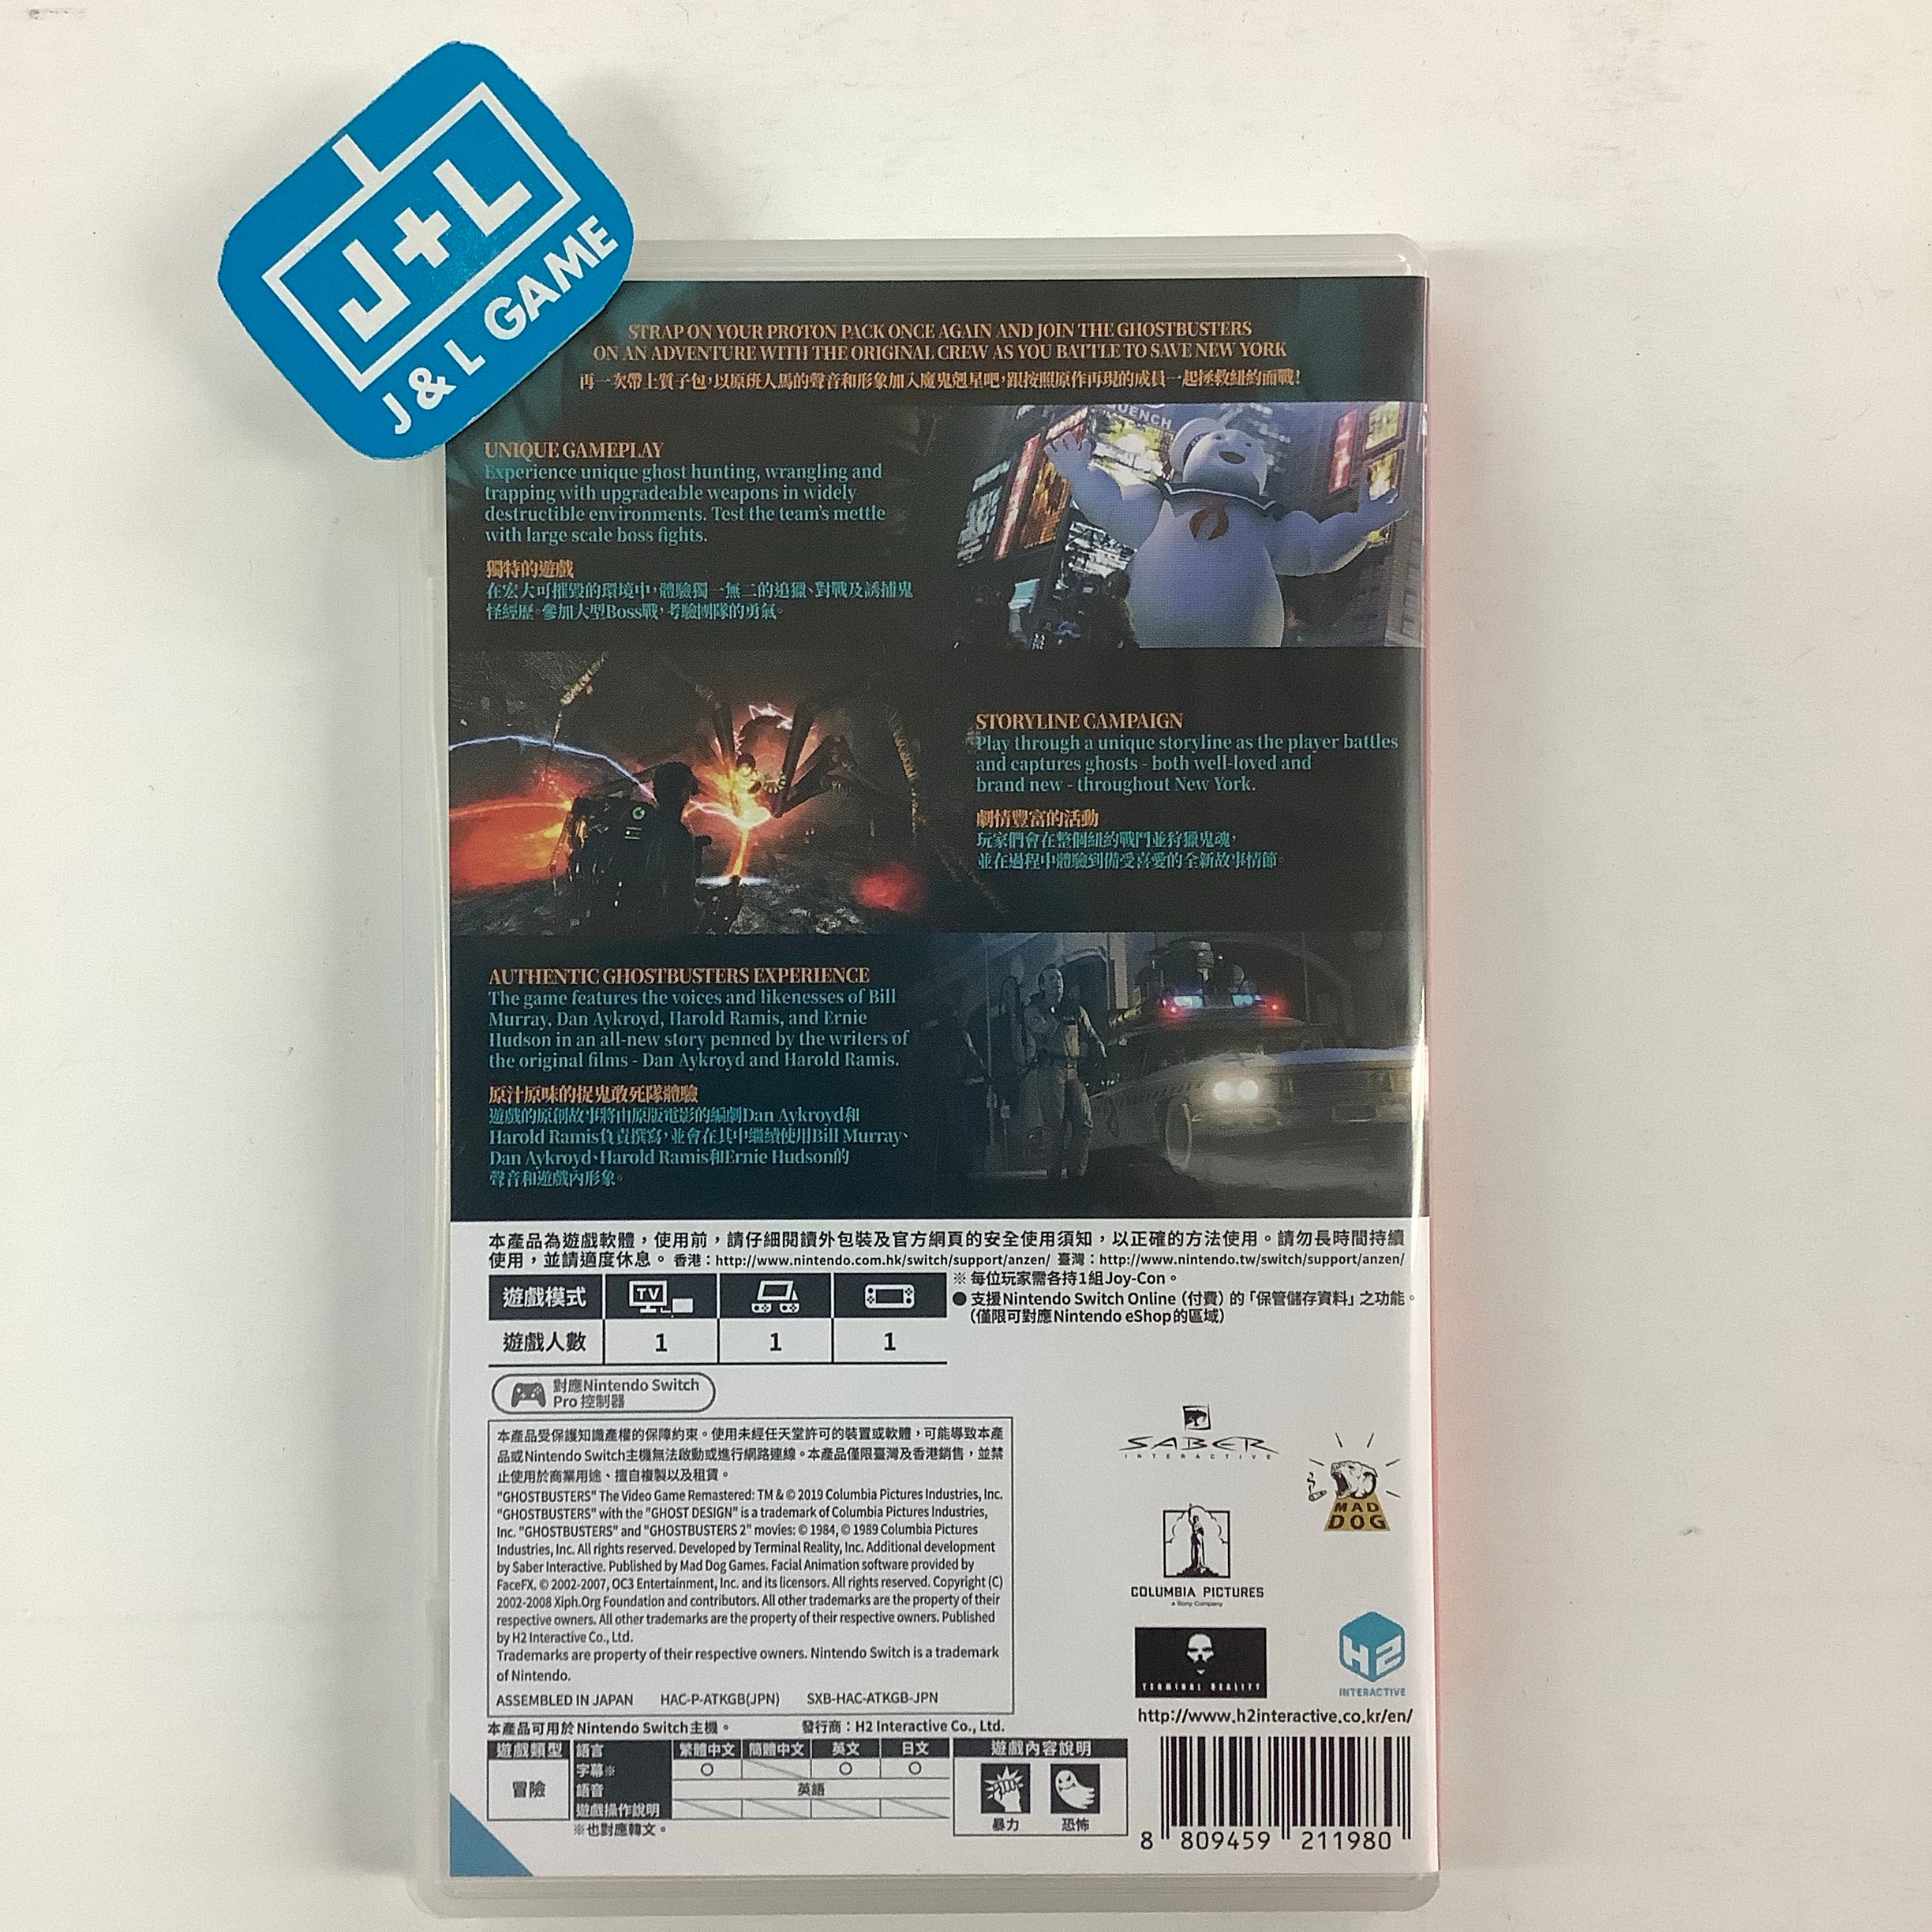 Ghostbusters: The Video Game Remastered - (NSW) Nintendo Switch [Pre-Owned] (Asia Import) Video Games Mad Dog Games   